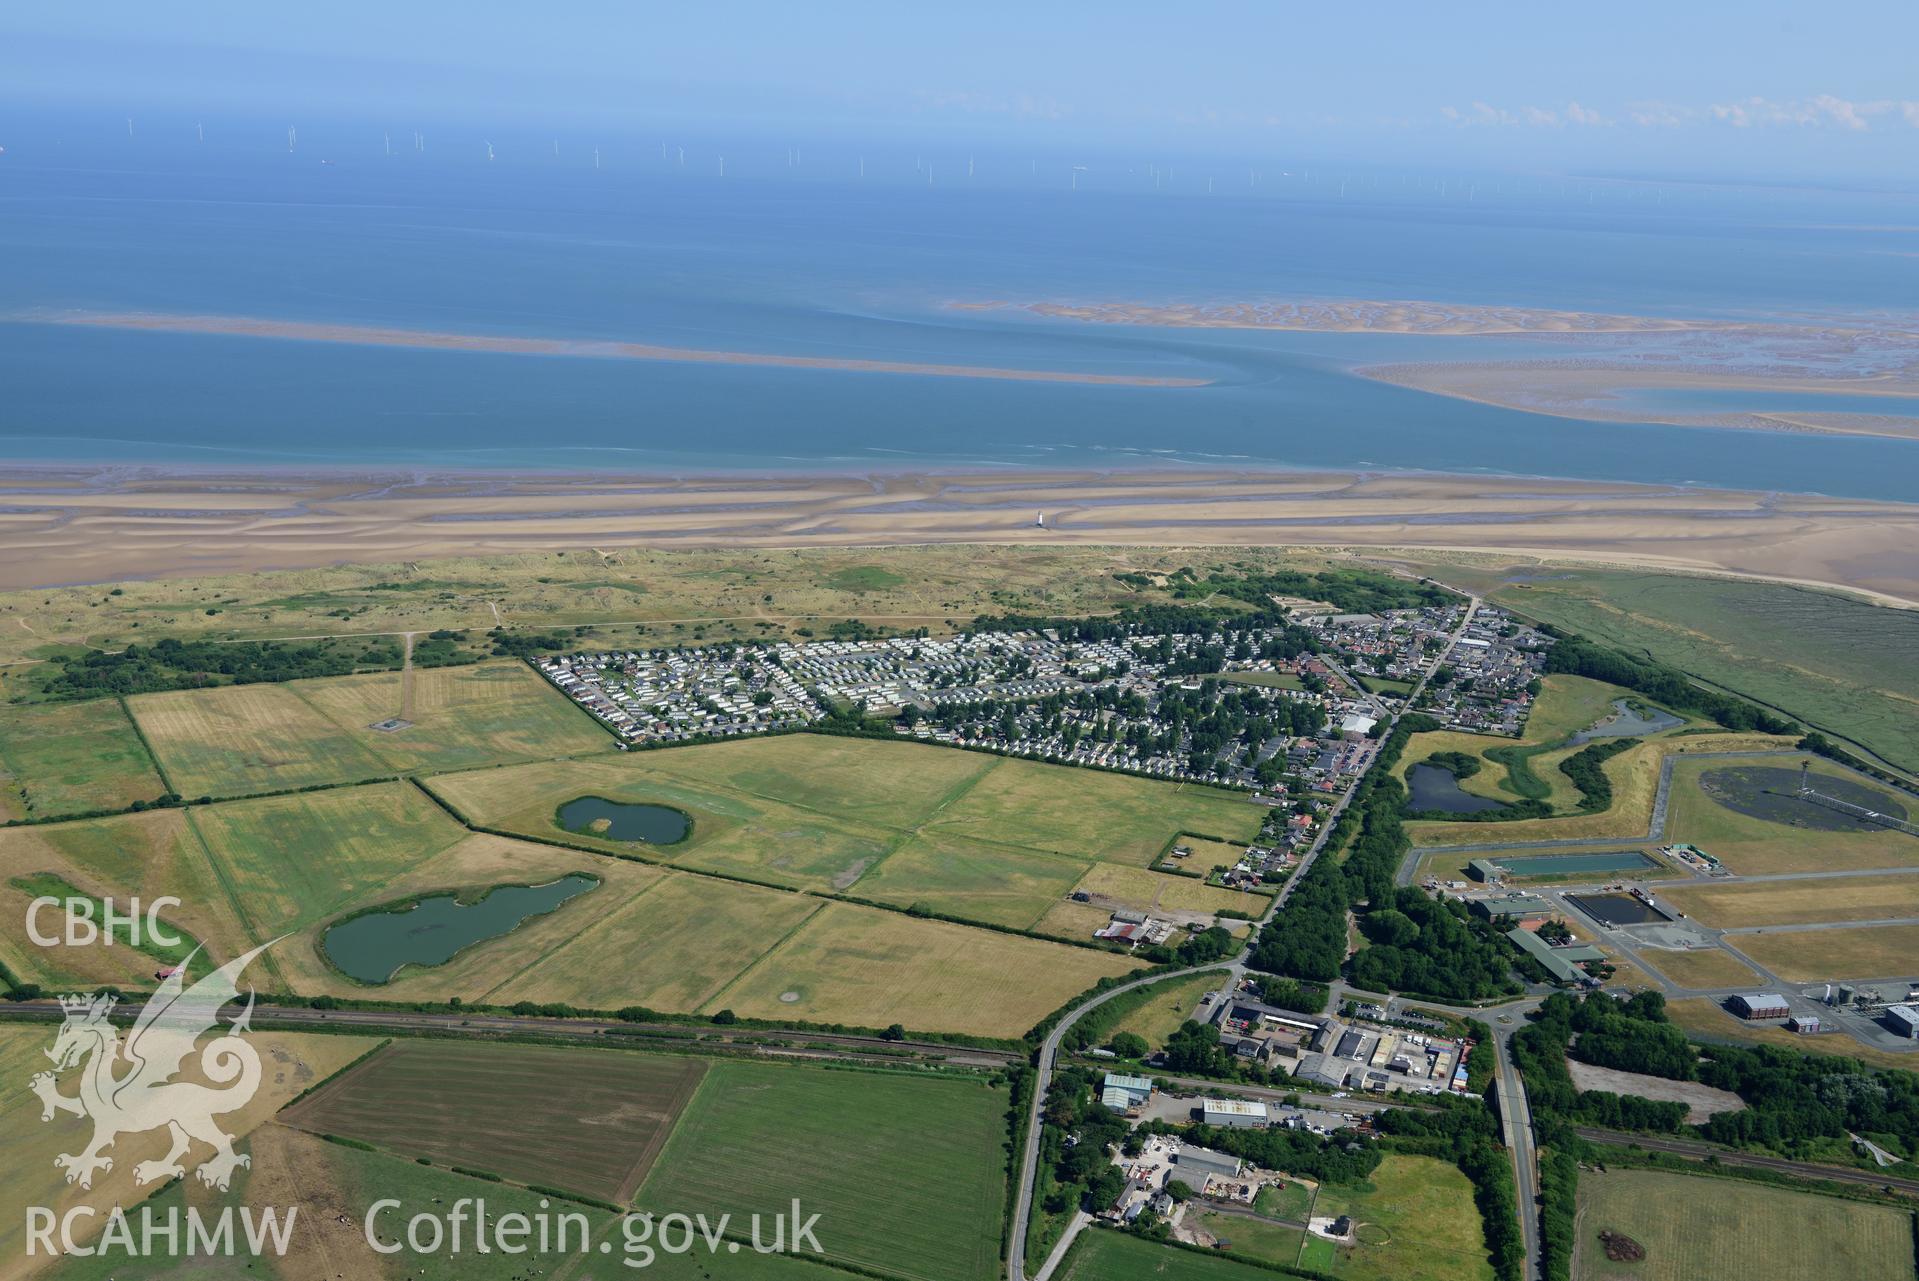 Royal Commission aerial photography of Point of Ayr lighthouse and Talacre taken on 19th July 2018 during the 2018 drought.